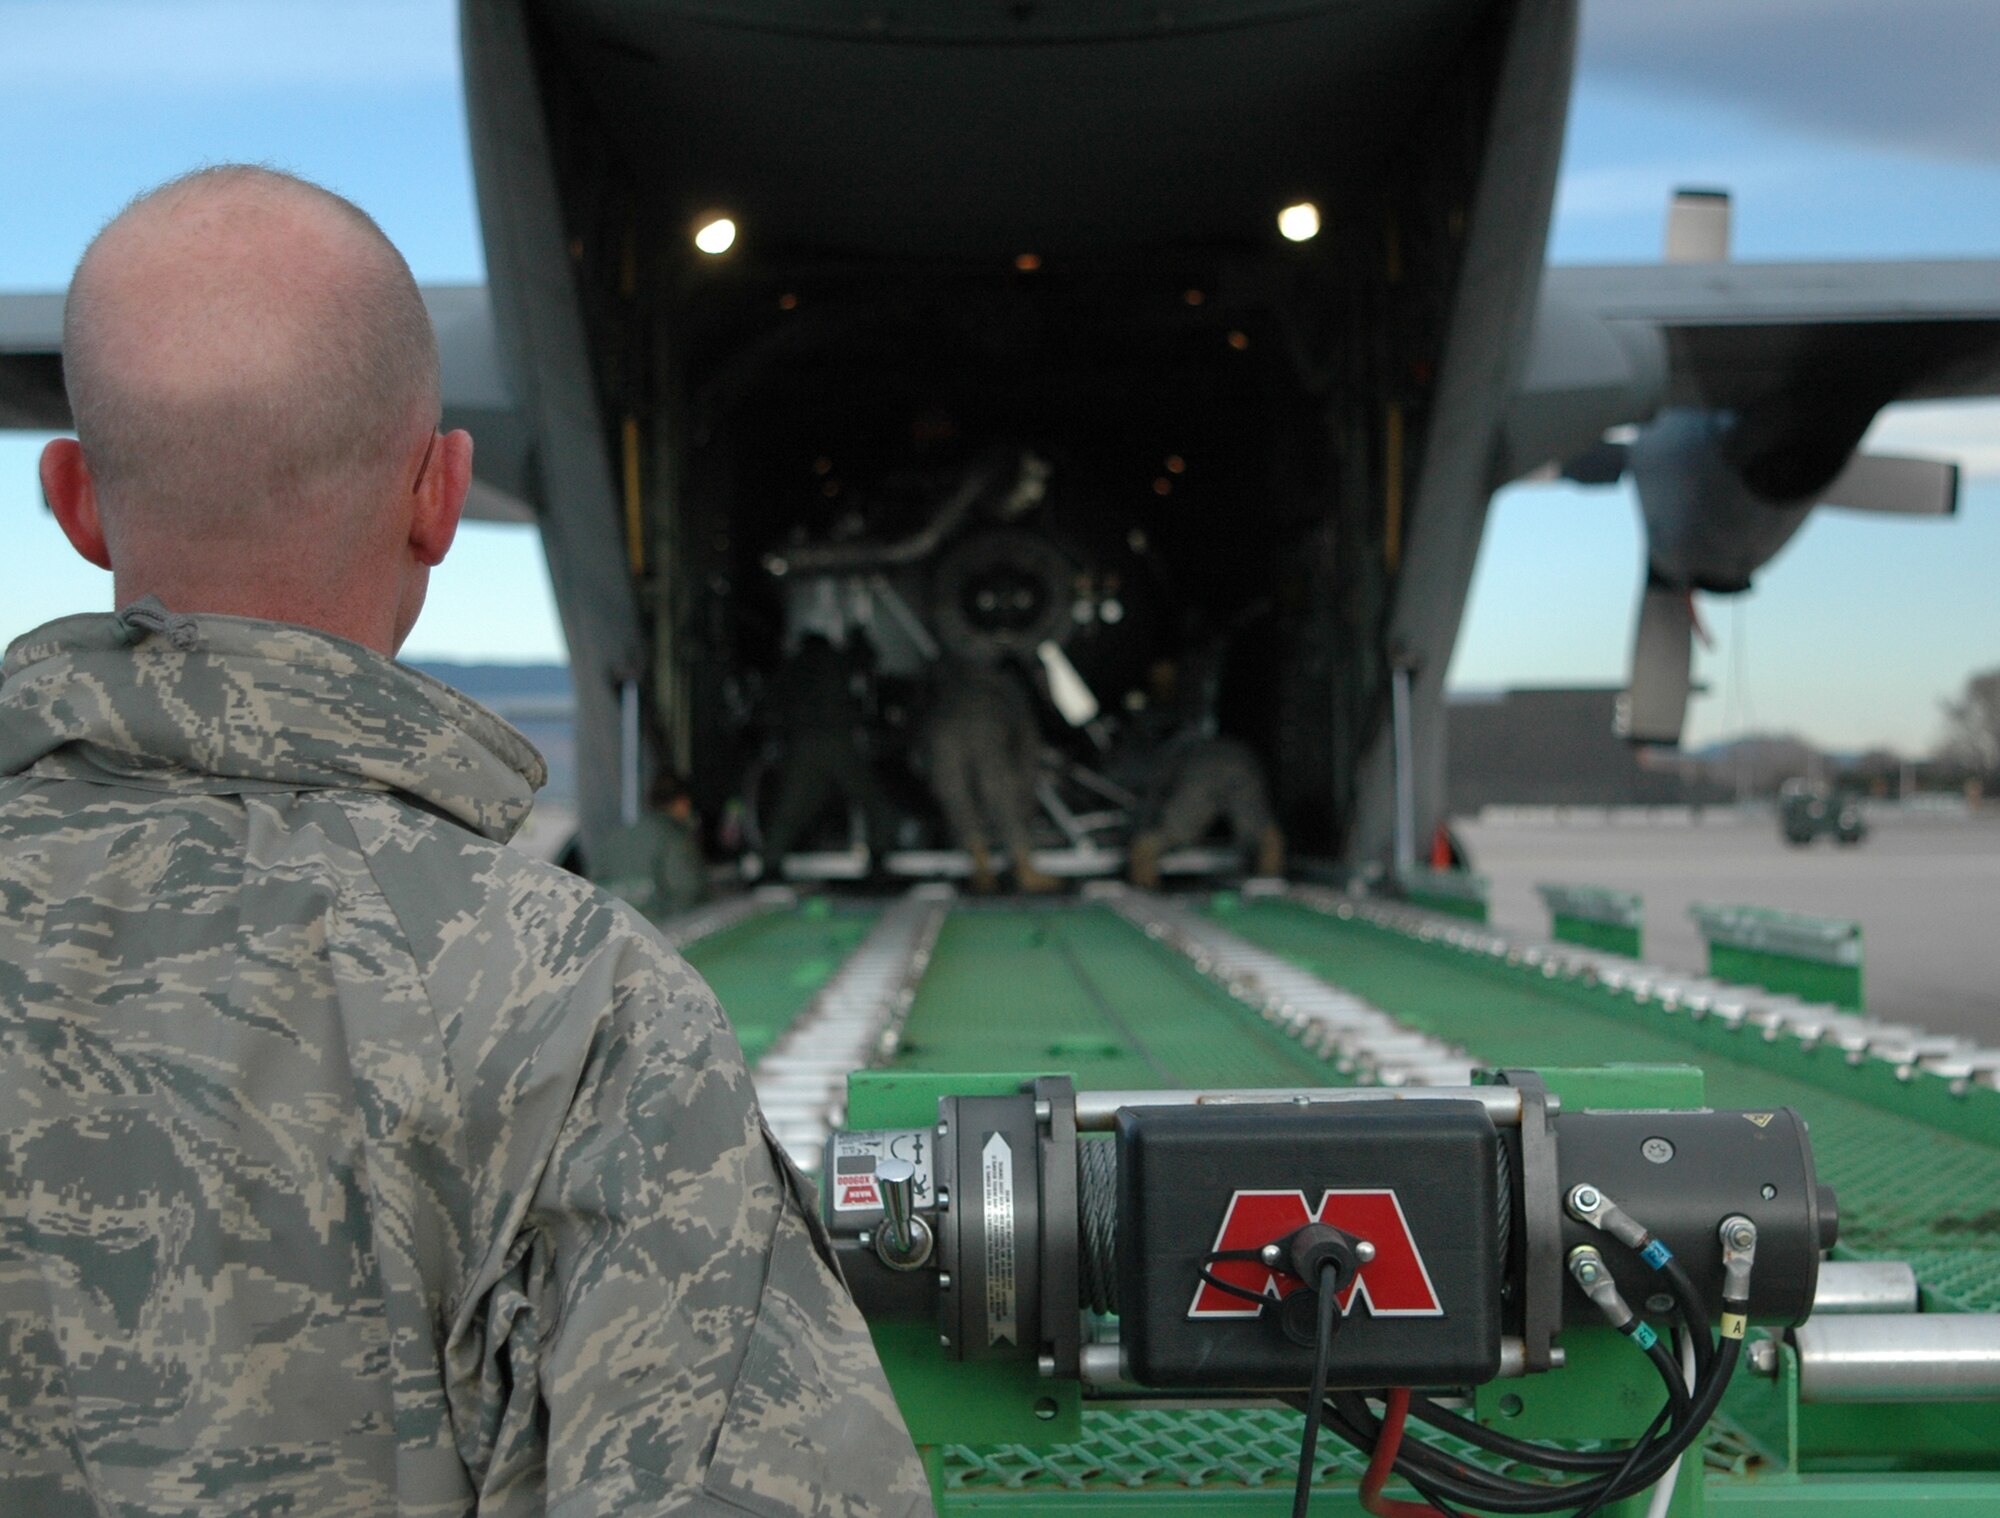 Master Sgt. Thomas Freeman looks on as members of the 302nd Airlift Wing work to offload a second-generation Military Airborne Firefighting System unit from its C-130 transport March 12, 2009, at Peterson Air Force Base, Colo. Known as MAFFS II, the unit augments the current MAFFS system, but is portable and self contained, making it more cost effective. Over time, MAFFS II will replace existing MAFFS units throughout the military's firefighting fleet supported by three Air National Guard wings as well as the Air Force Reserve's 302nd AW at Peterson. Sergeant Freeman is a loadmaster with the 731st Airlift Squadron. (U.S. Air Force photo/Senior Airman Stephen Collier)